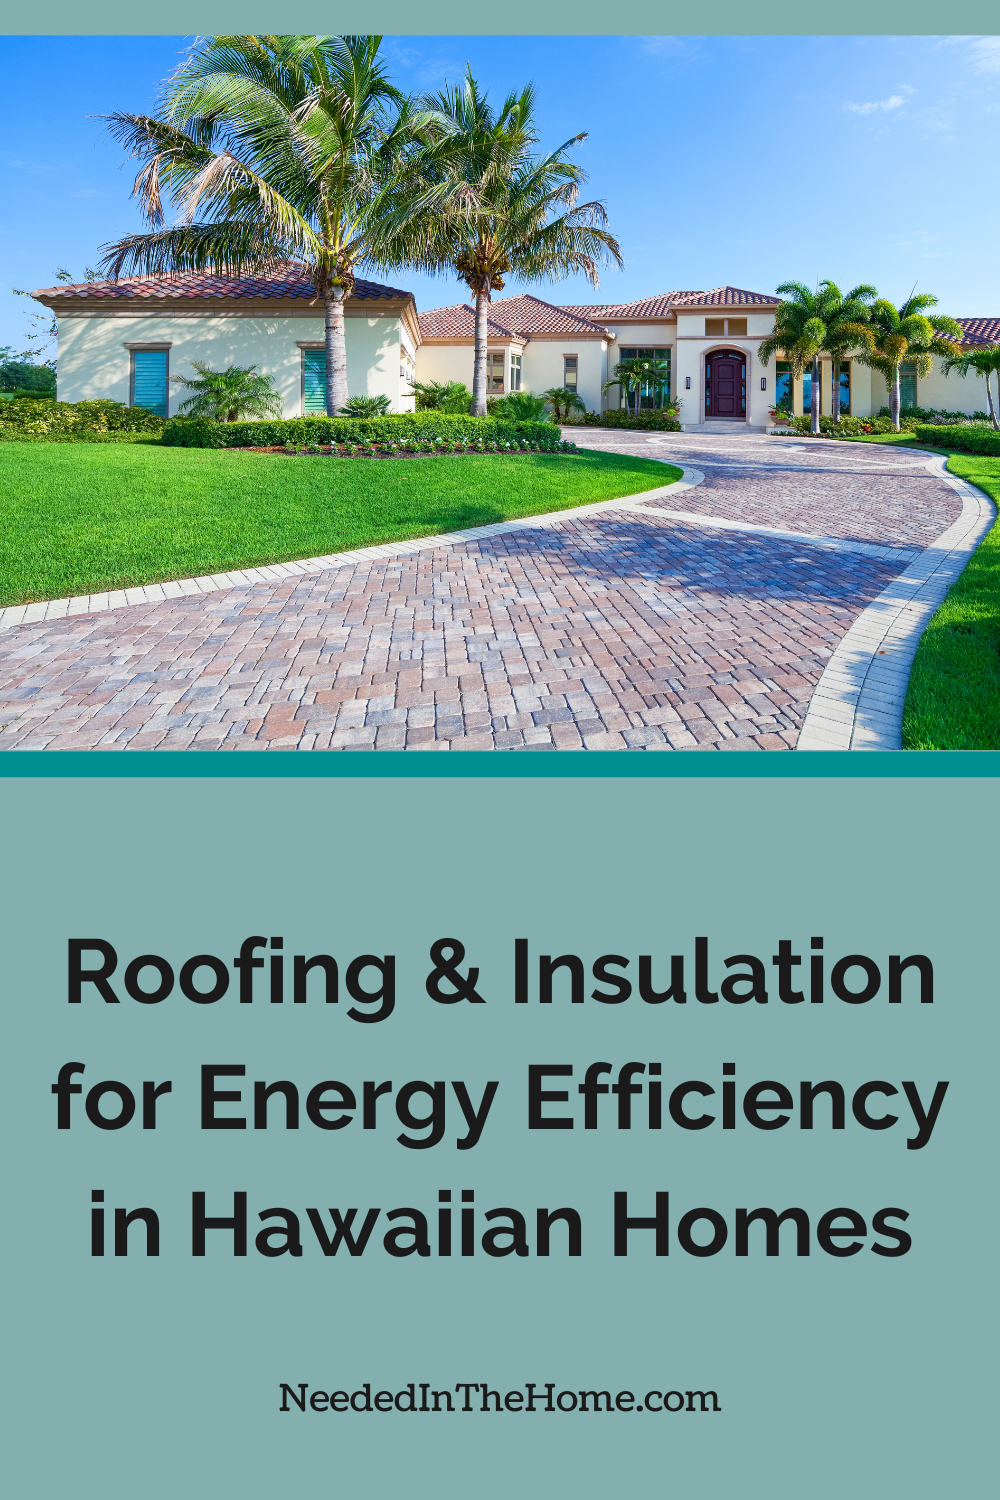 large home in hawaii roofing and insulation for energy efficiency in hawaiian homes neededinthehome